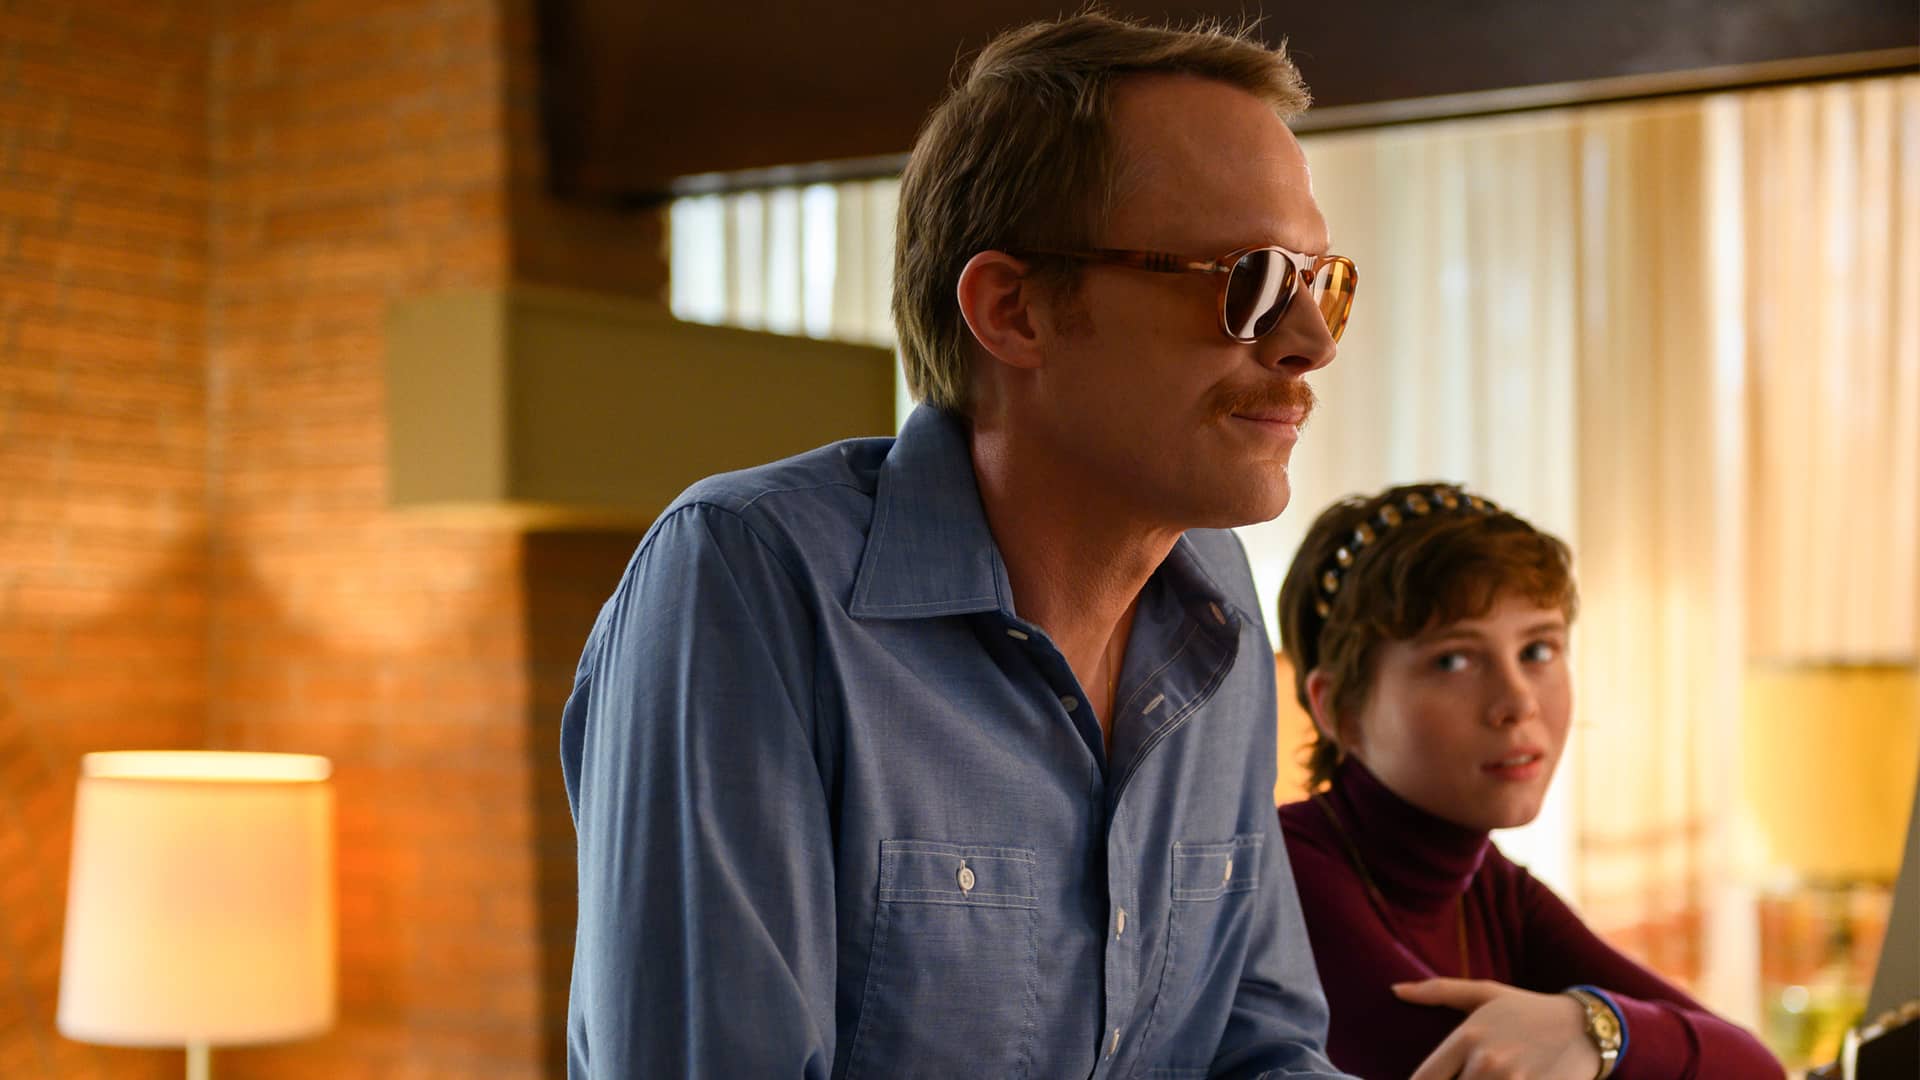 Paul Bettany and Sophia Lillis stand in a motel lobby in the film "Uncle Frank"